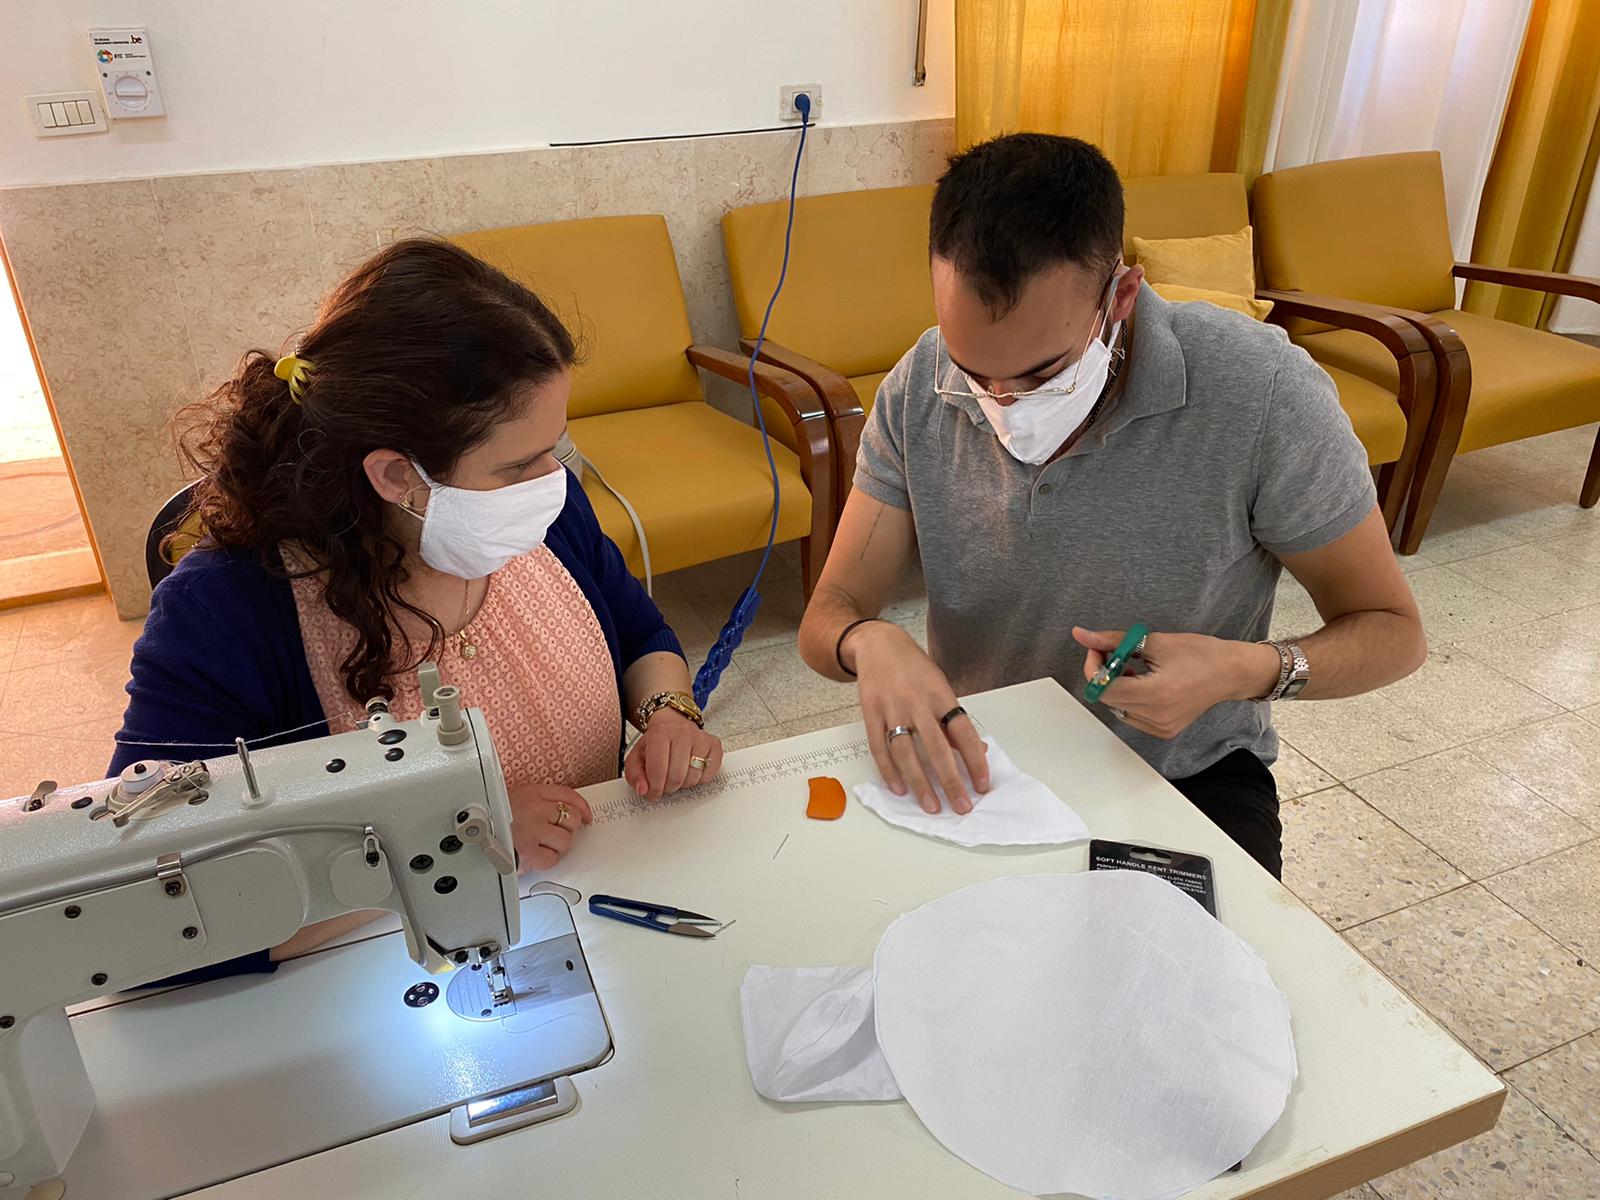 A day of training in producing protective masks, within the project “Active Women Against Covid-19”